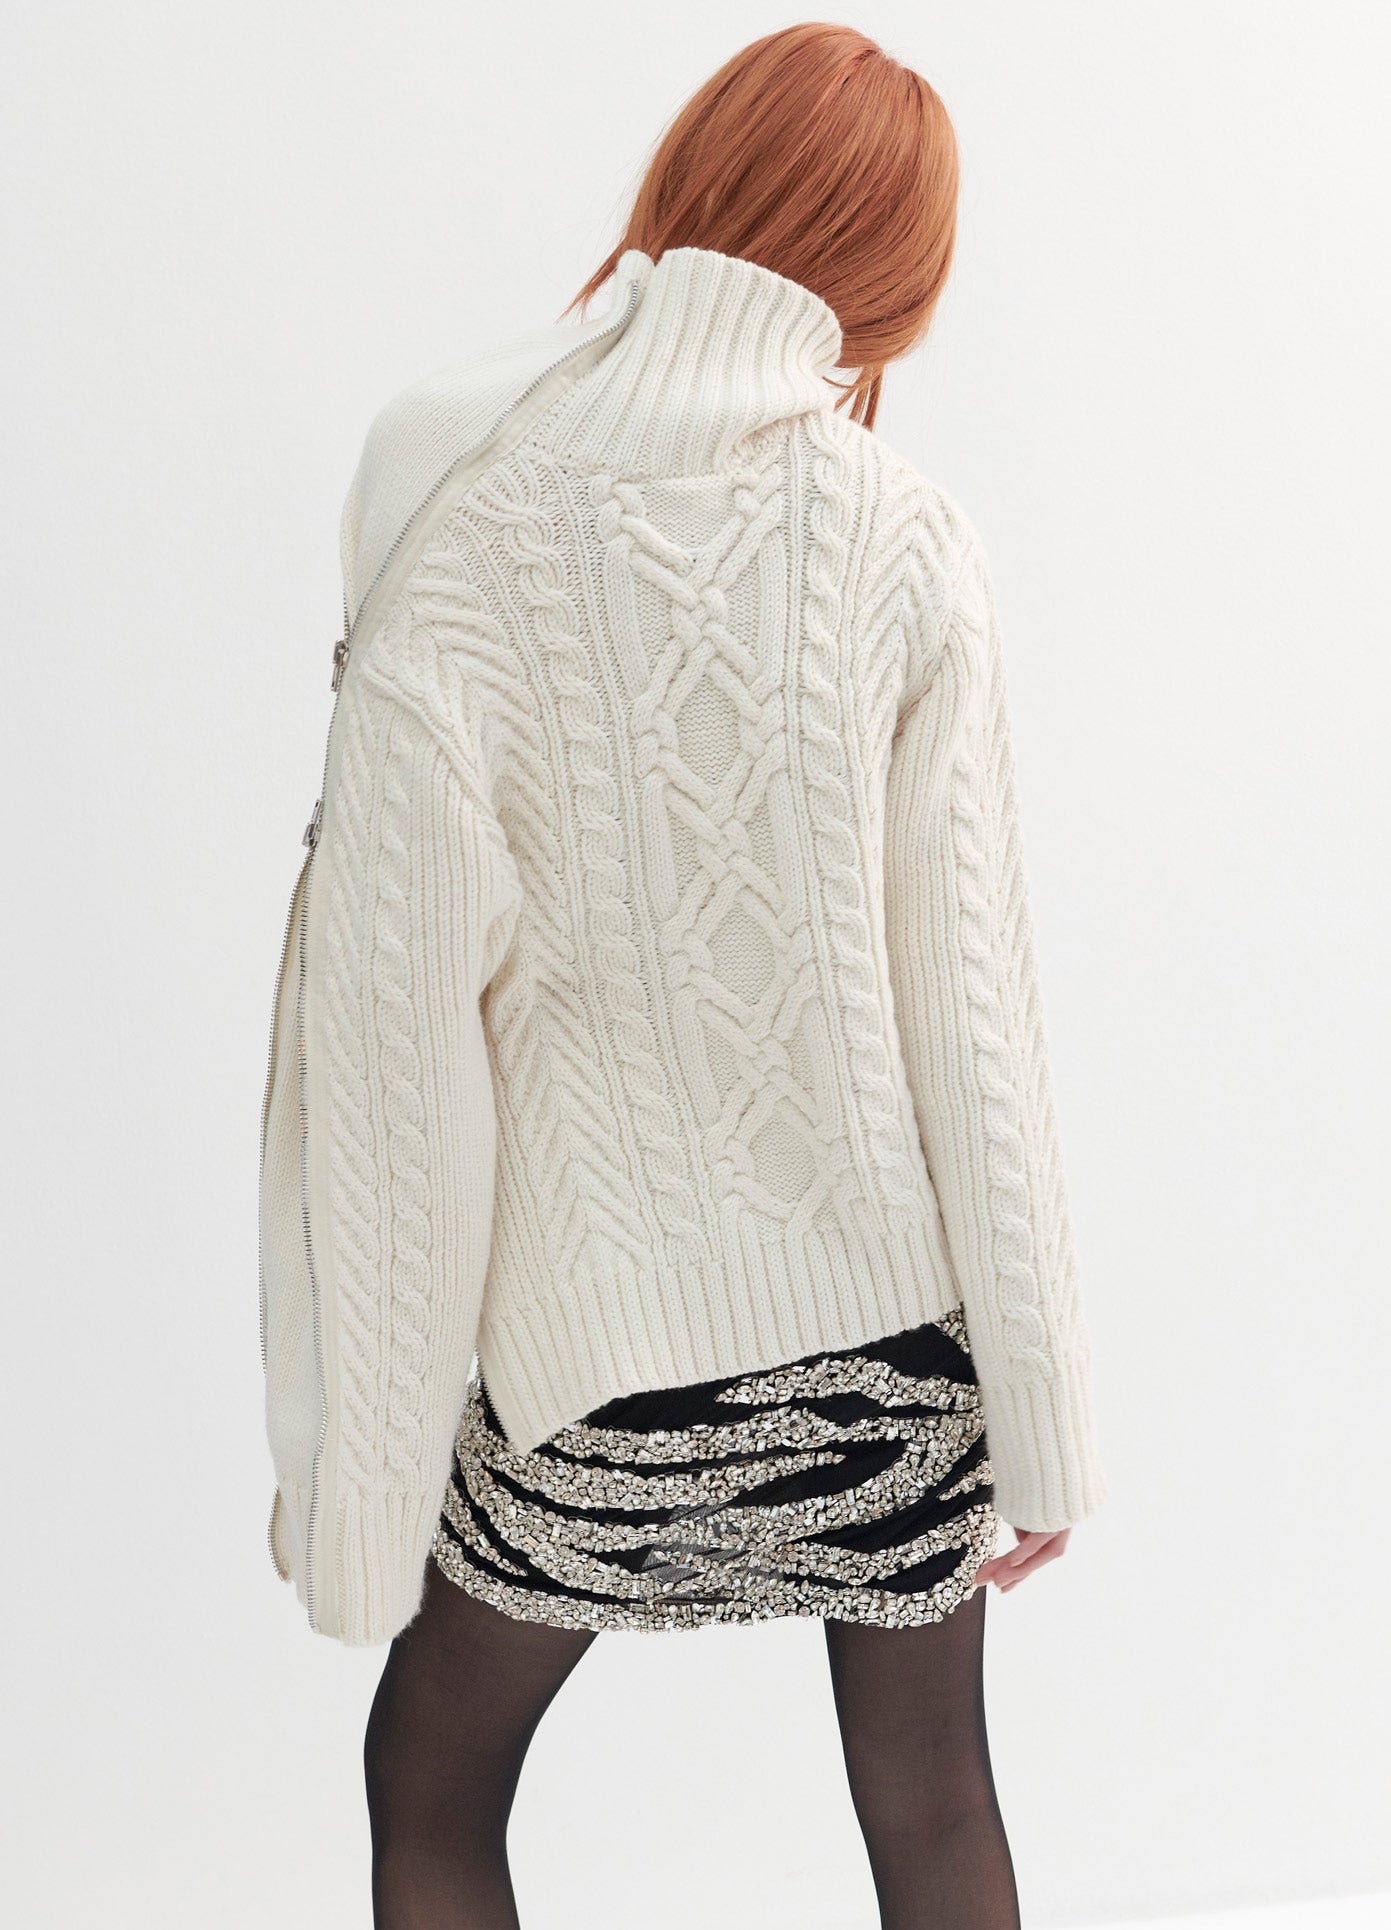 MONSE Turtleneck Zipper Detail Cable Sweater in Ivory on Model Back View